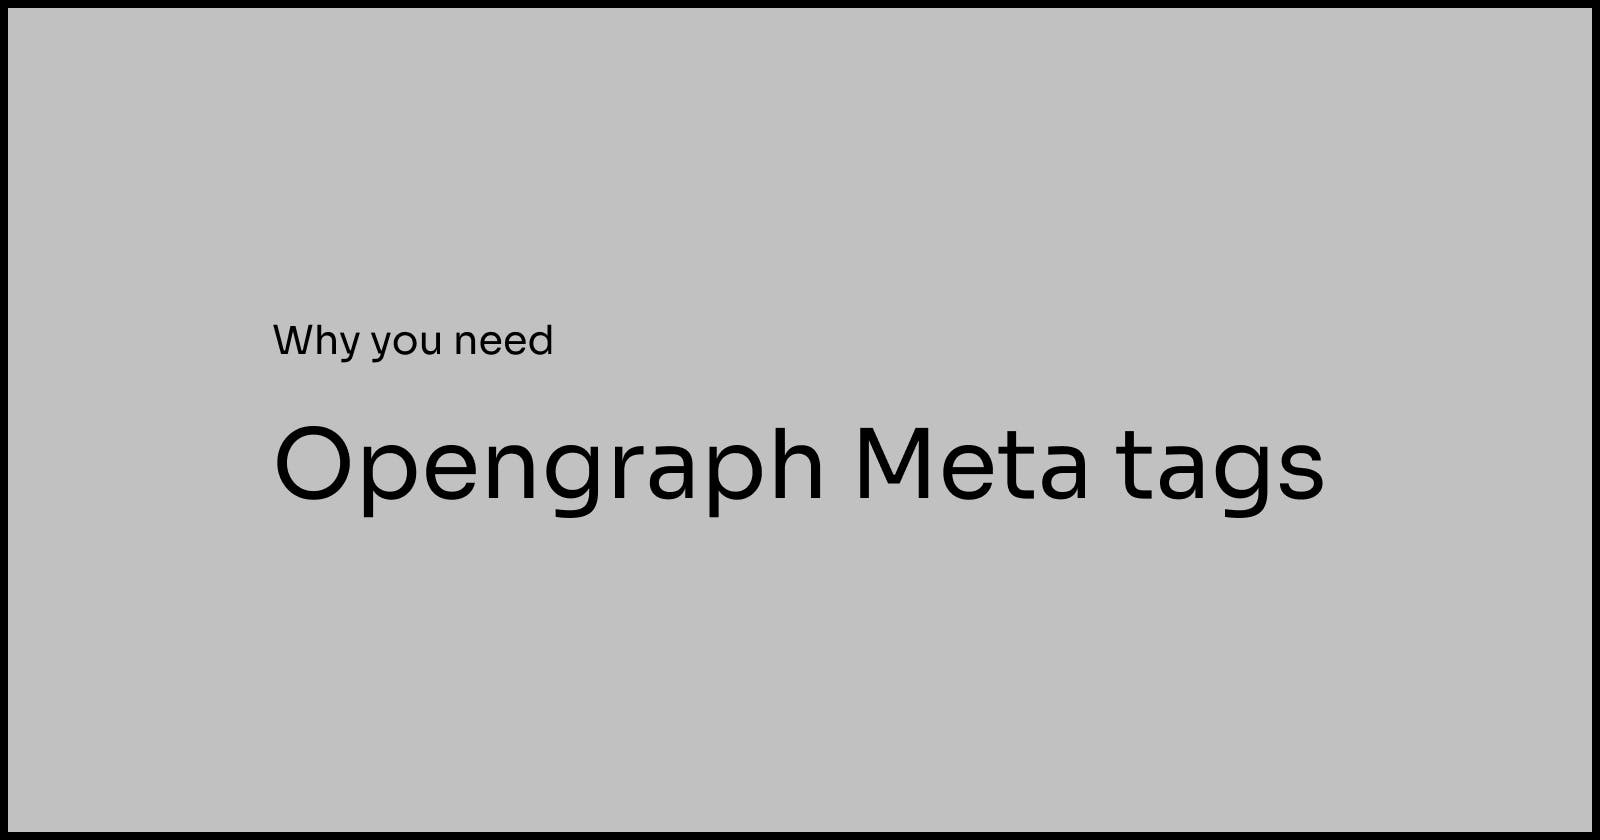 Add Opengraph Meta tags to your web pages